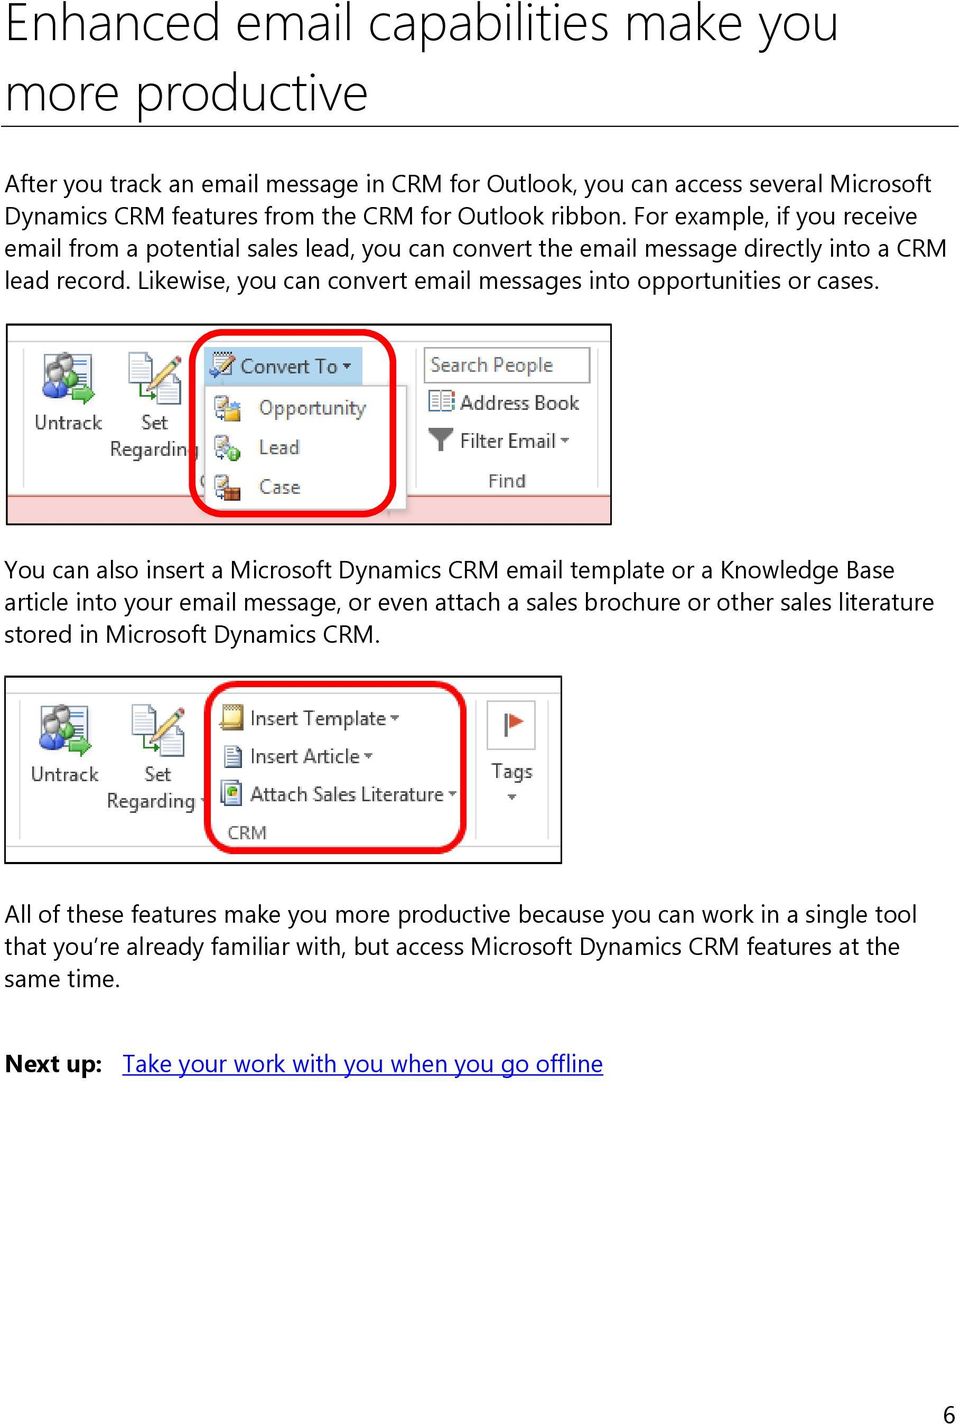 You can also insert a Microsoft Dynamics CRM email template or a Knowledge Base article into your email message, or even attach a sales brochure or other sales literature stored in Microsoft Dynamics